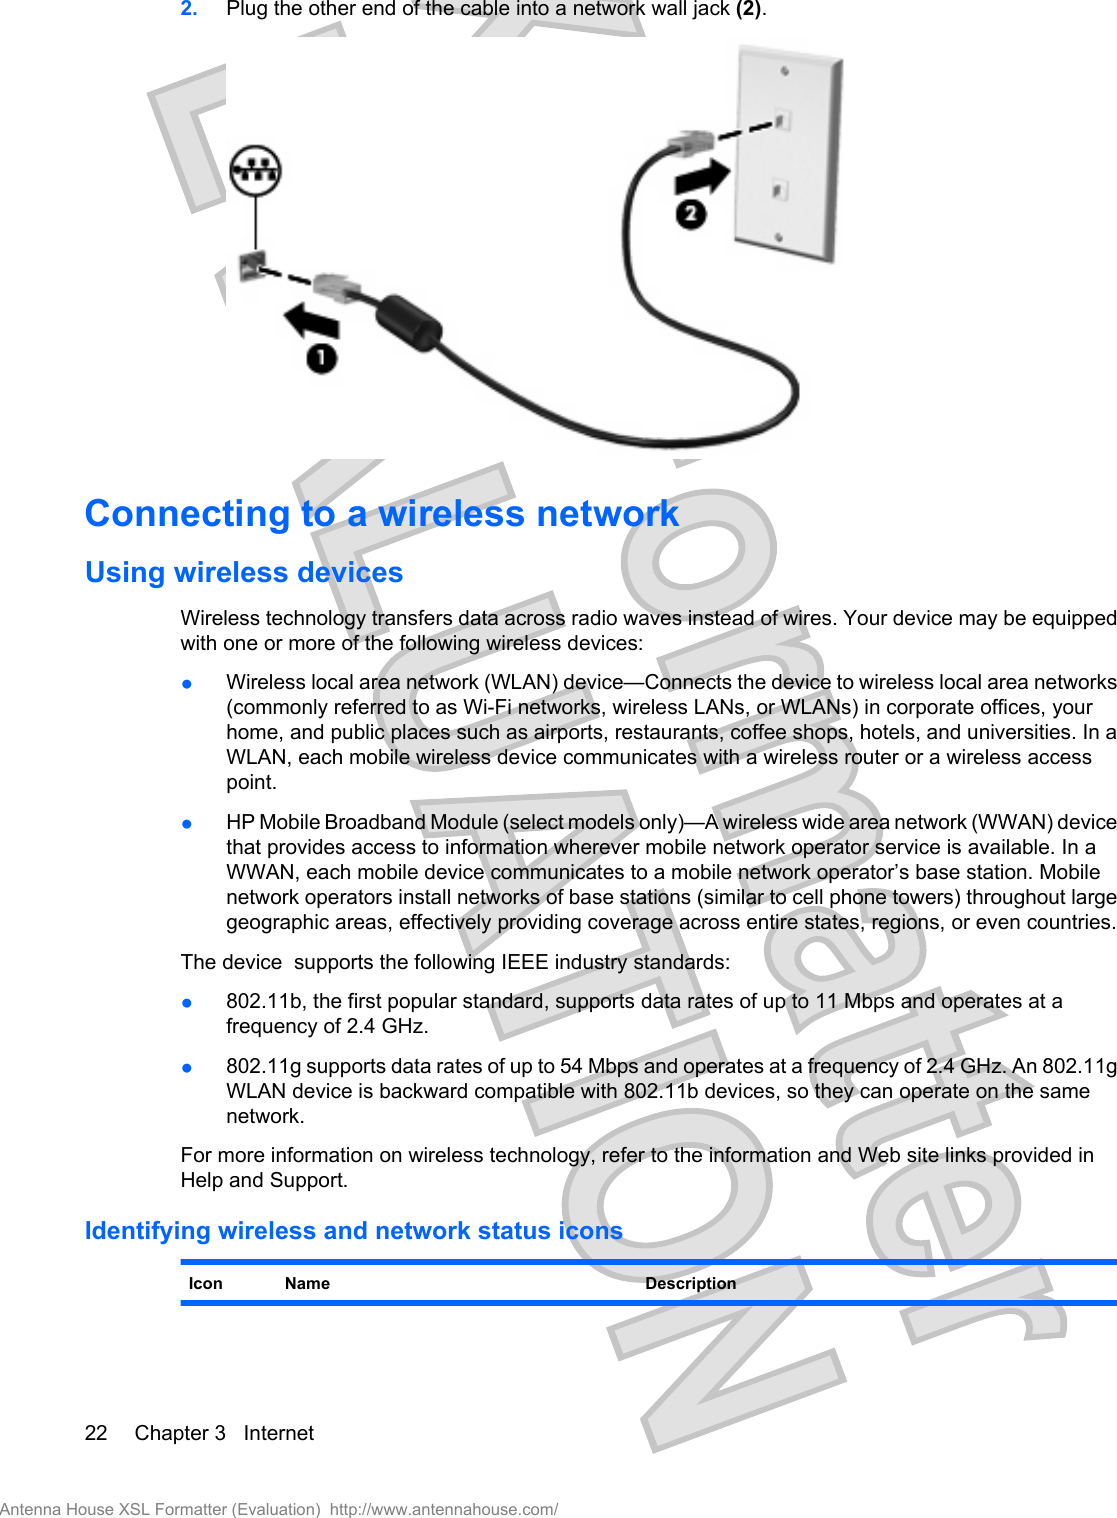 2. Plug the other end of the cable into a network wall jack (2).Connecting to a wireless networkUsing wireless devicesWireless technology transfers data across radio waves instead of wires. Your device may be equippedwith one or more of the following wireless devices:●Wireless local area network (WLAN) device—Connects the device to wireless local area networks(commonly referred to as Wi-Fi networks, wireless LANs, or WLANs) in corporate offices, yourhome, and public places such as airports, restaurants, coffee shops, hotels, and universities. In aWLAN, each mobile wireless device communicates with a wireless router or a wireless accesspoint.●HP Mobile Broadband Module (select models only)—A wireless wide area network (WWAN) devicethat provides access to information wherever mobile network operator service is available. In aWWAN, each mobile device communicates to a mobile network operator’s base station. Mobilenetwork operators install networks of base stations (similar to cell phone towers) throughout largegeographic areas, effectively providing coverage across entire states, regions, or even countries.The device  supports the following IEEE industry standards:●802.11b, the first popular standard, supports data rates of up to 11 Mbps and operates at afrequency of 2.4 GHz.●802.11g supports data rates of up to 54 Mbps and operates at a frequency of 2.4 GHz. An 802.11gWLAN device is backward compatible with 802.11b devices, so they can operate on the samenetwork.For more information on wireless technology, refer to the information and Web site links provided inHelp and Support.Identifying wireless and network status iconsIcon Name Description22 Chapter 3   InternetAntenna House XSL Formatter (Evaluation)  http://www.antennahouse.com/